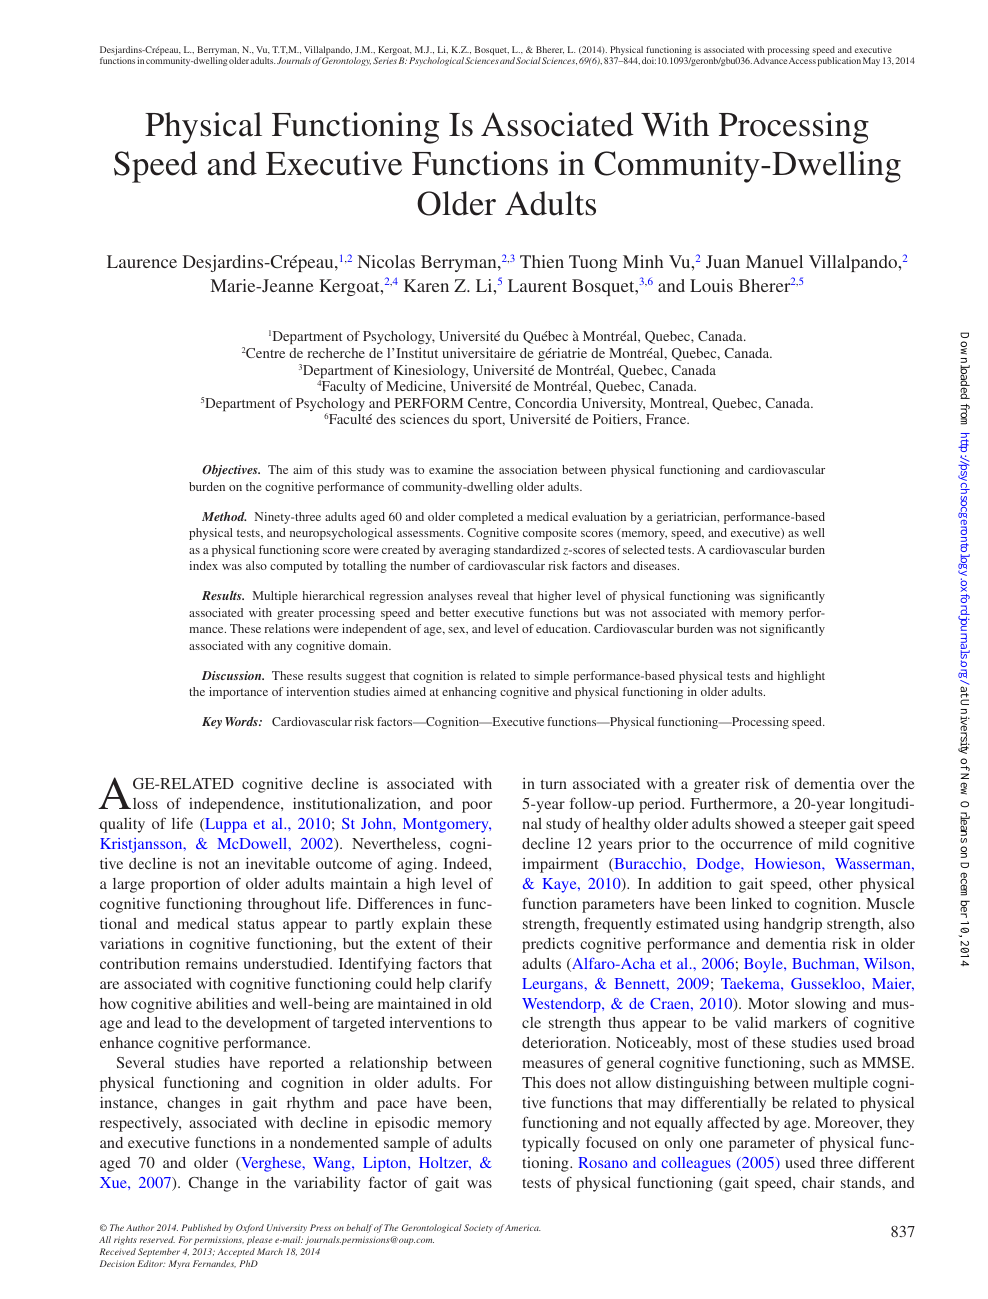 Physical Functioning Is Associated With Processing Speed And Executive Functions In Community Dwelling Older Adults Topic Of Research Paper In Psychology Download Scholarly Article Pdf And Read For Free On Cyberleninka Open